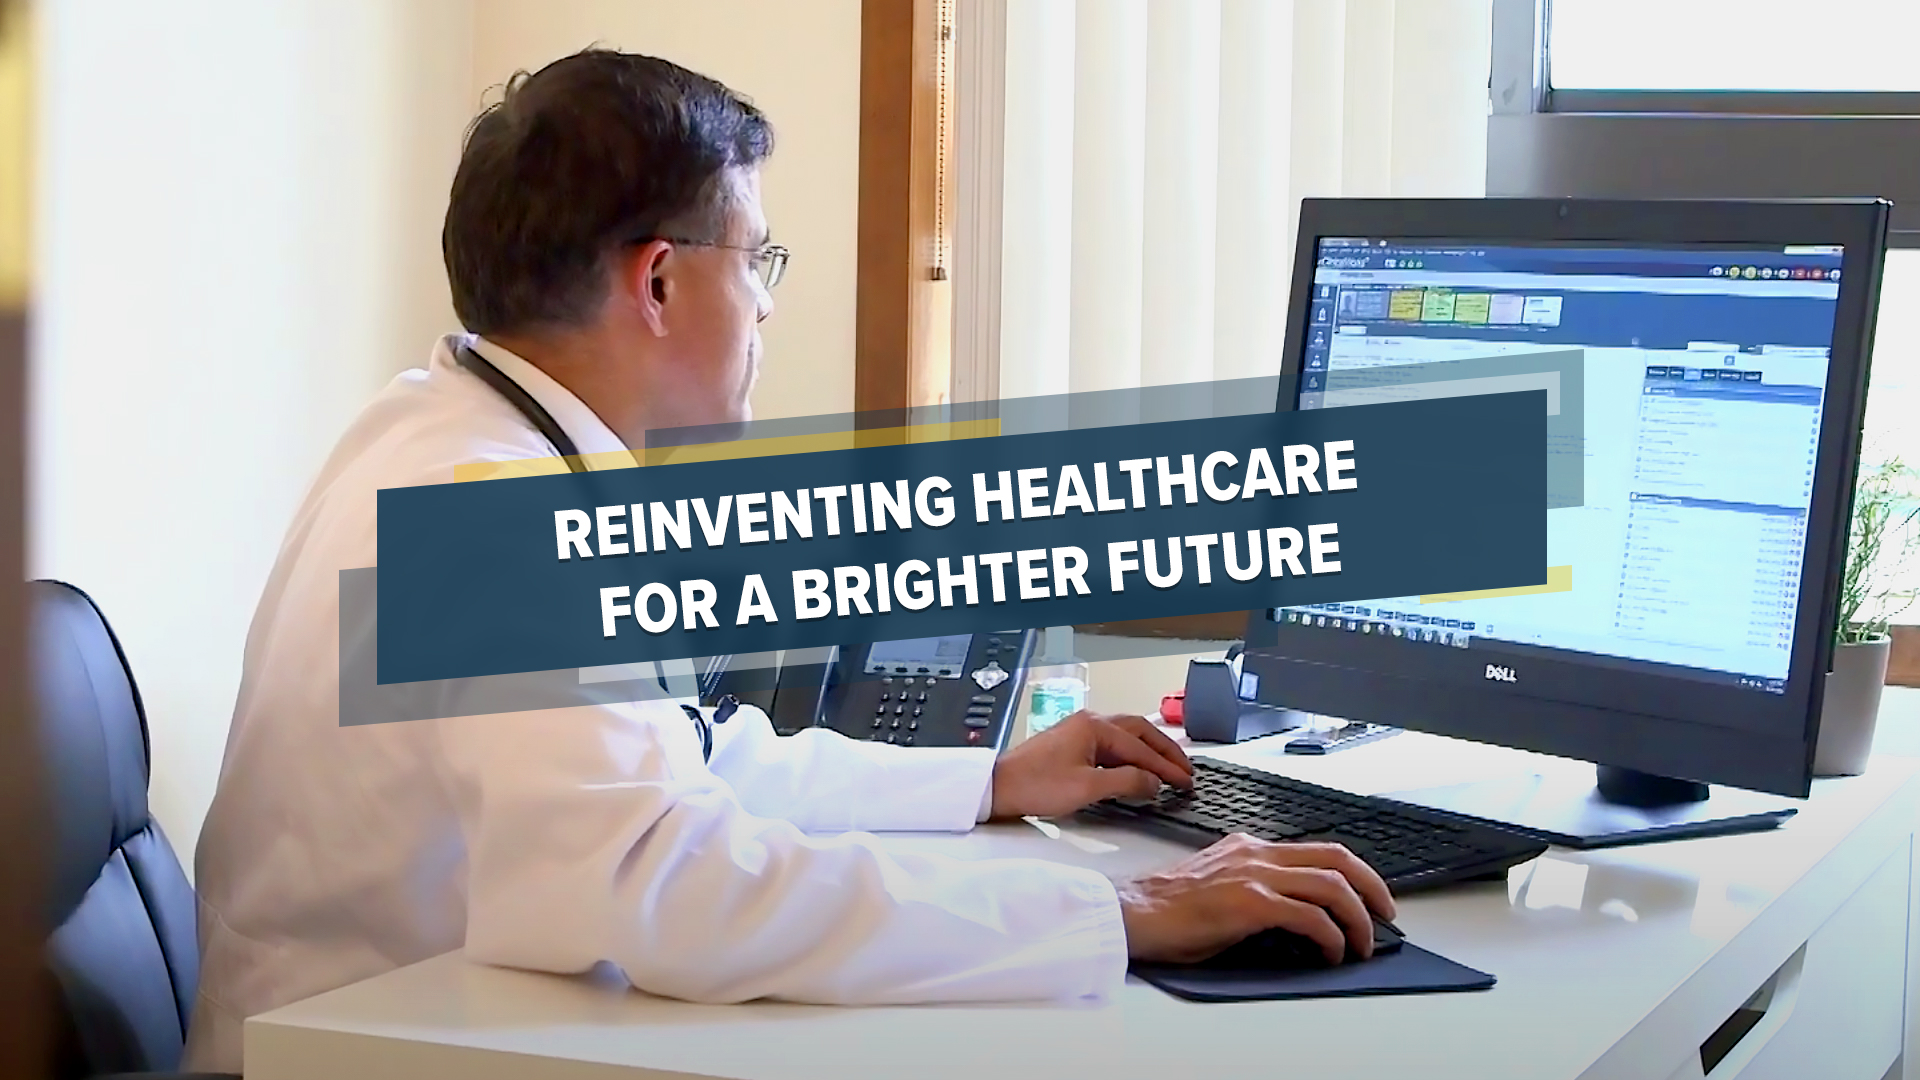 com-reinventing-healthcare-video-thumbnail (2)